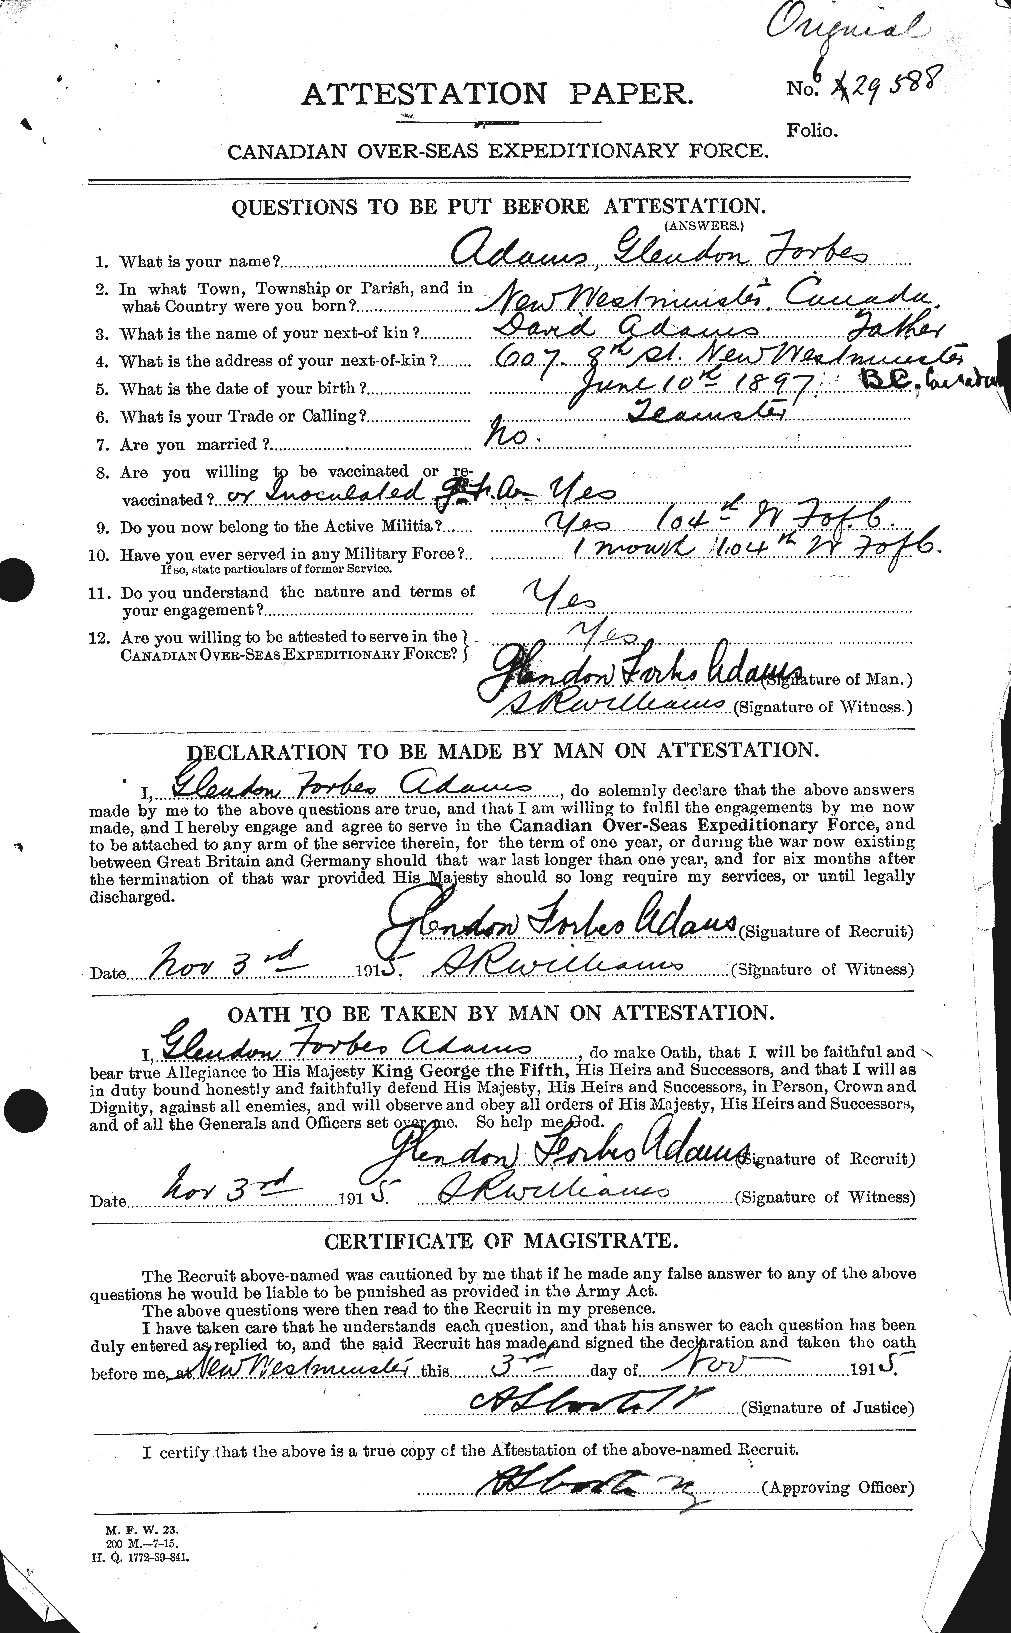 Personnel Records of the First World War - CEF 203133a